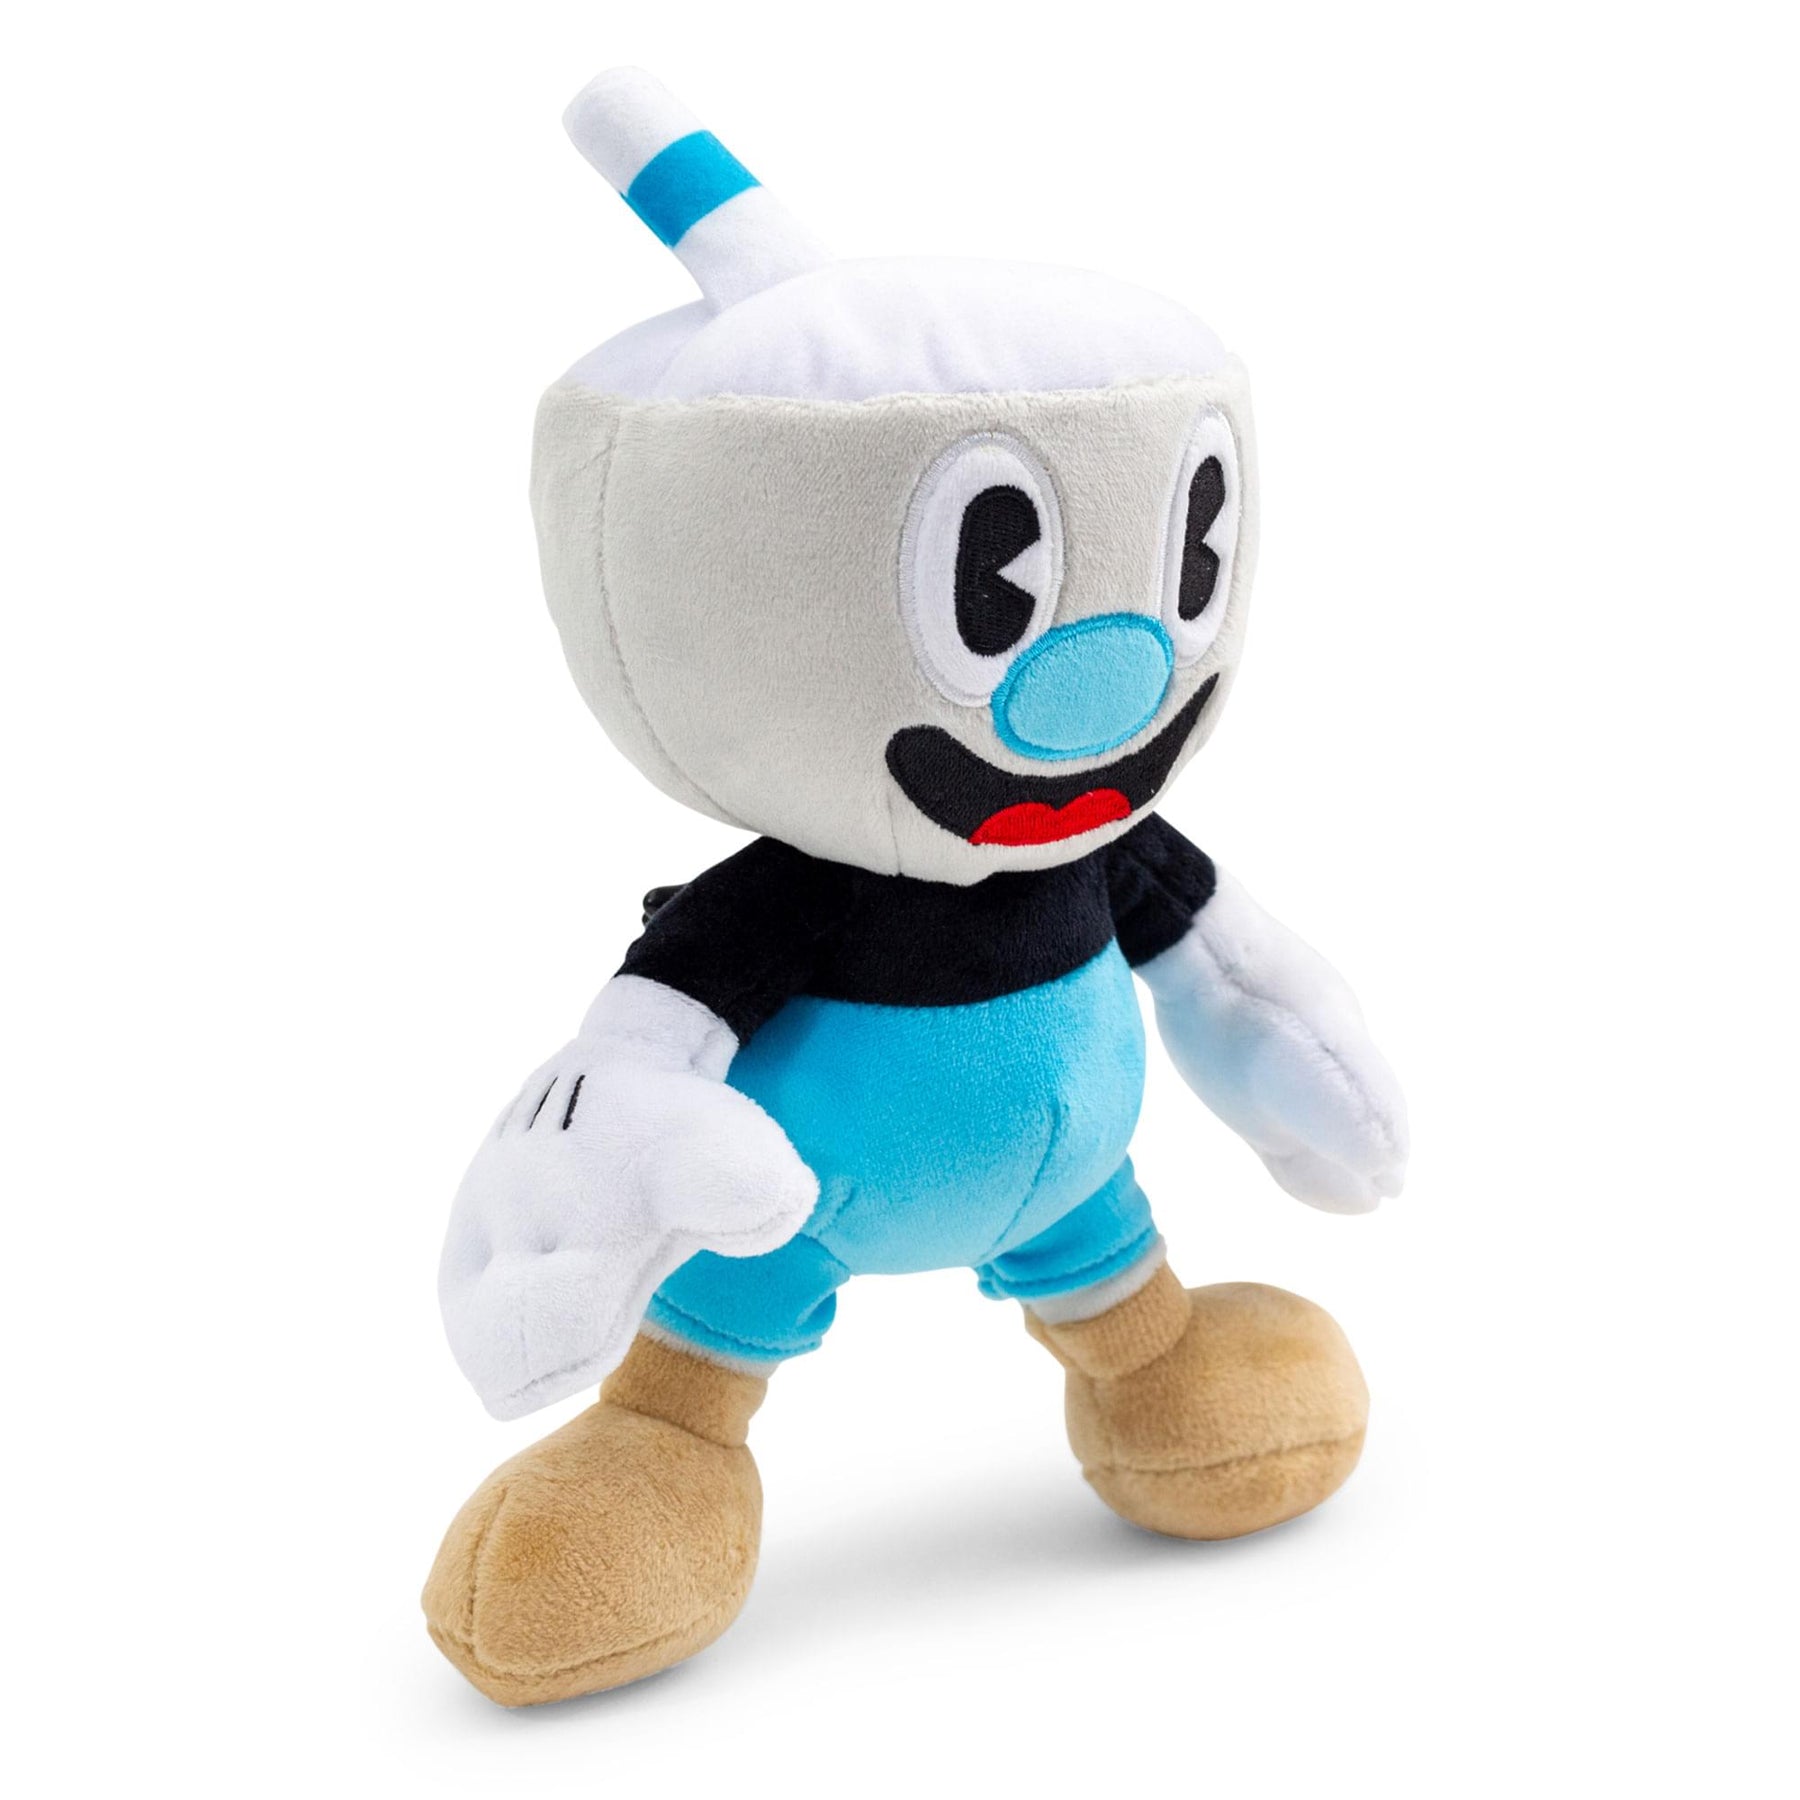 Toynk Cuphead 8-inch Collector Plush Toy